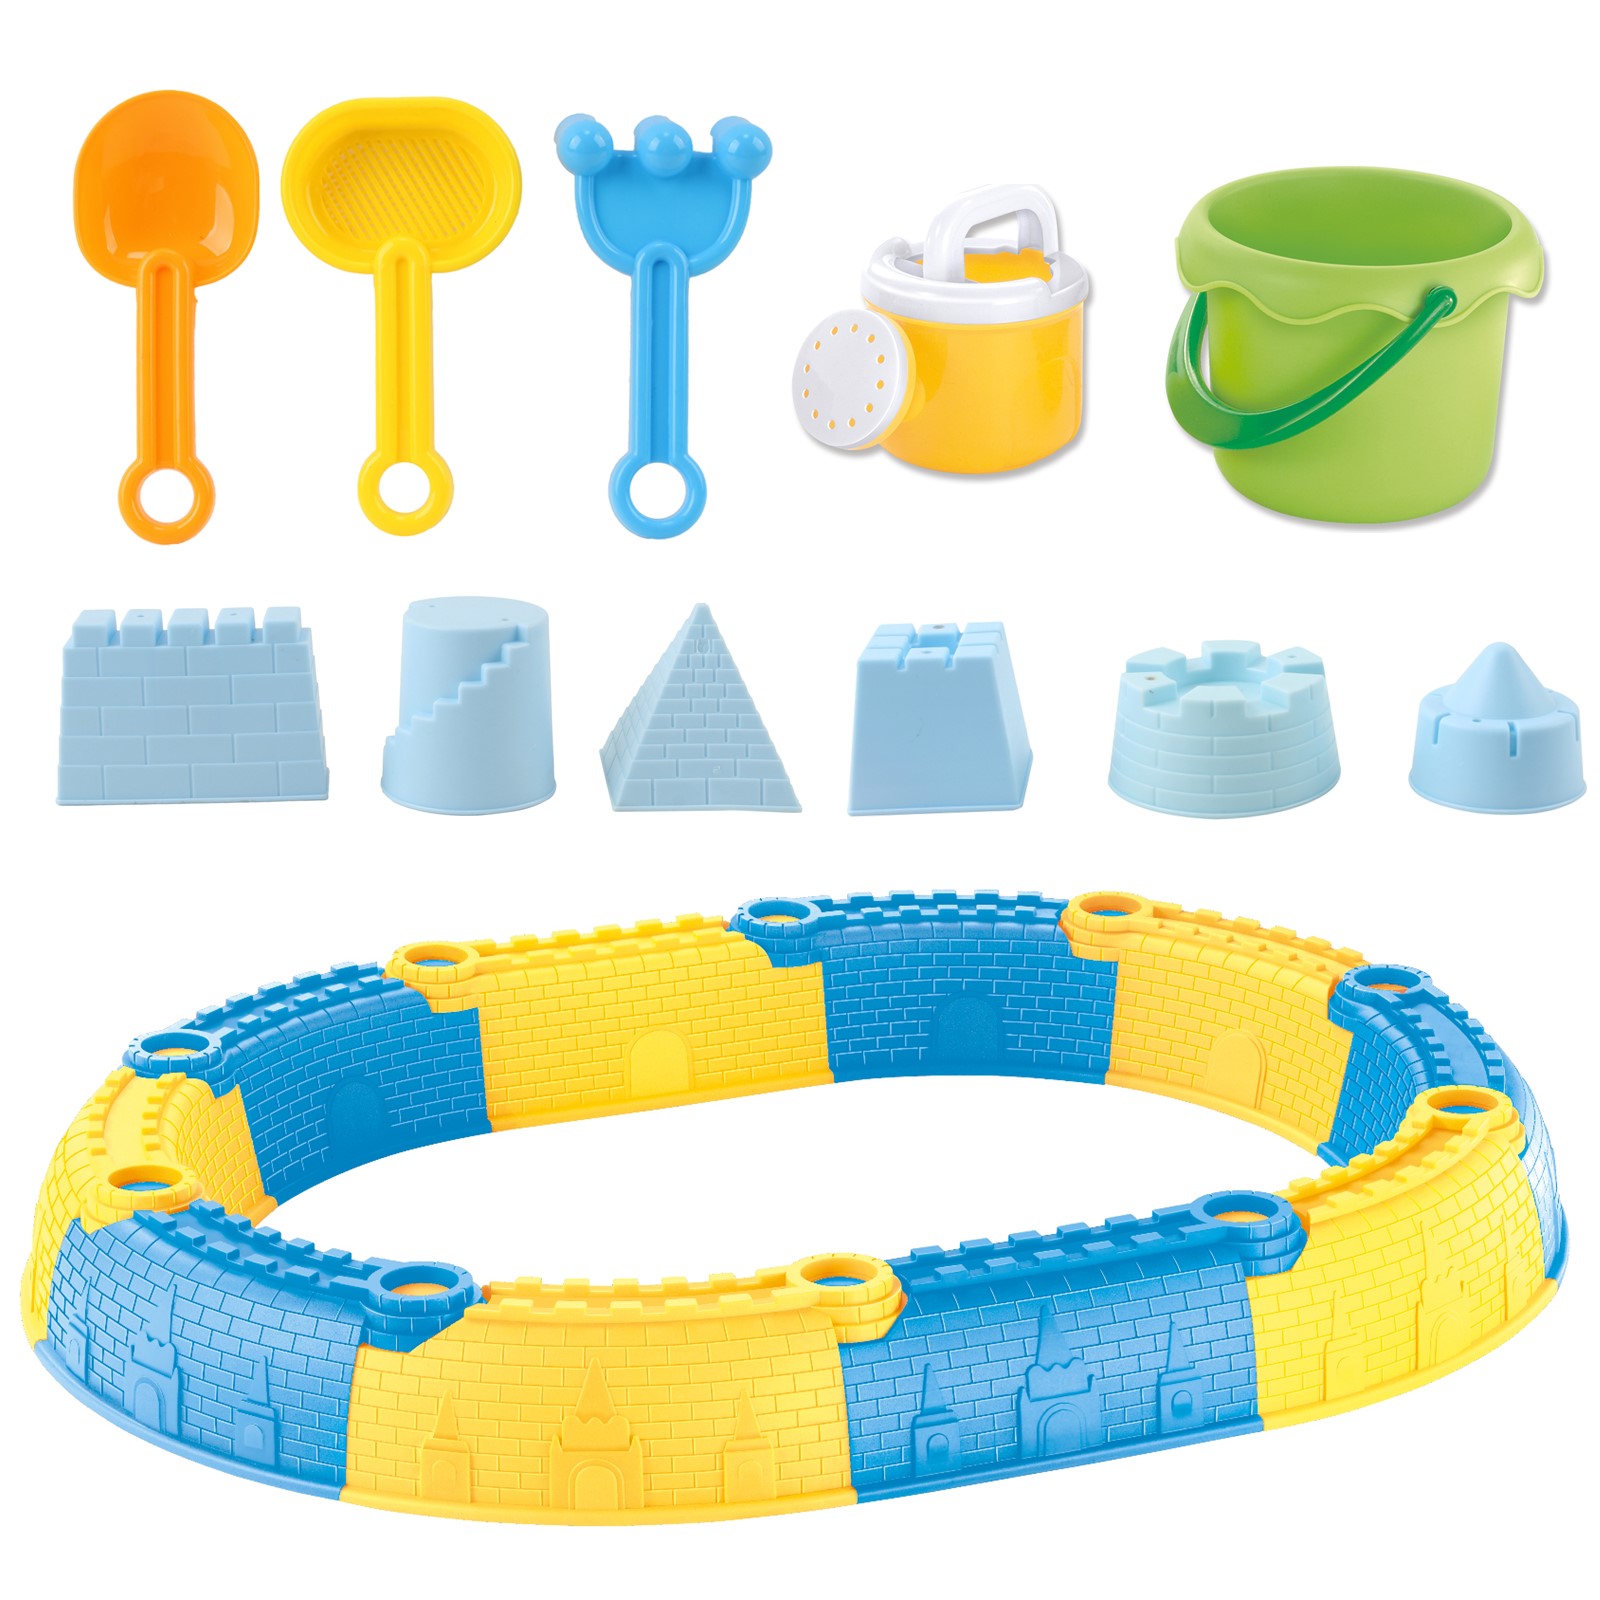 23 Piece Beach Toy Sand Castle Set Includes Molds Tools Bucket Shovel Rake Sifter And Watering Can Perfect For Outdoor Fun Kids Pretend Play Great Gift For Preschool Children Boys Girl Toddlers